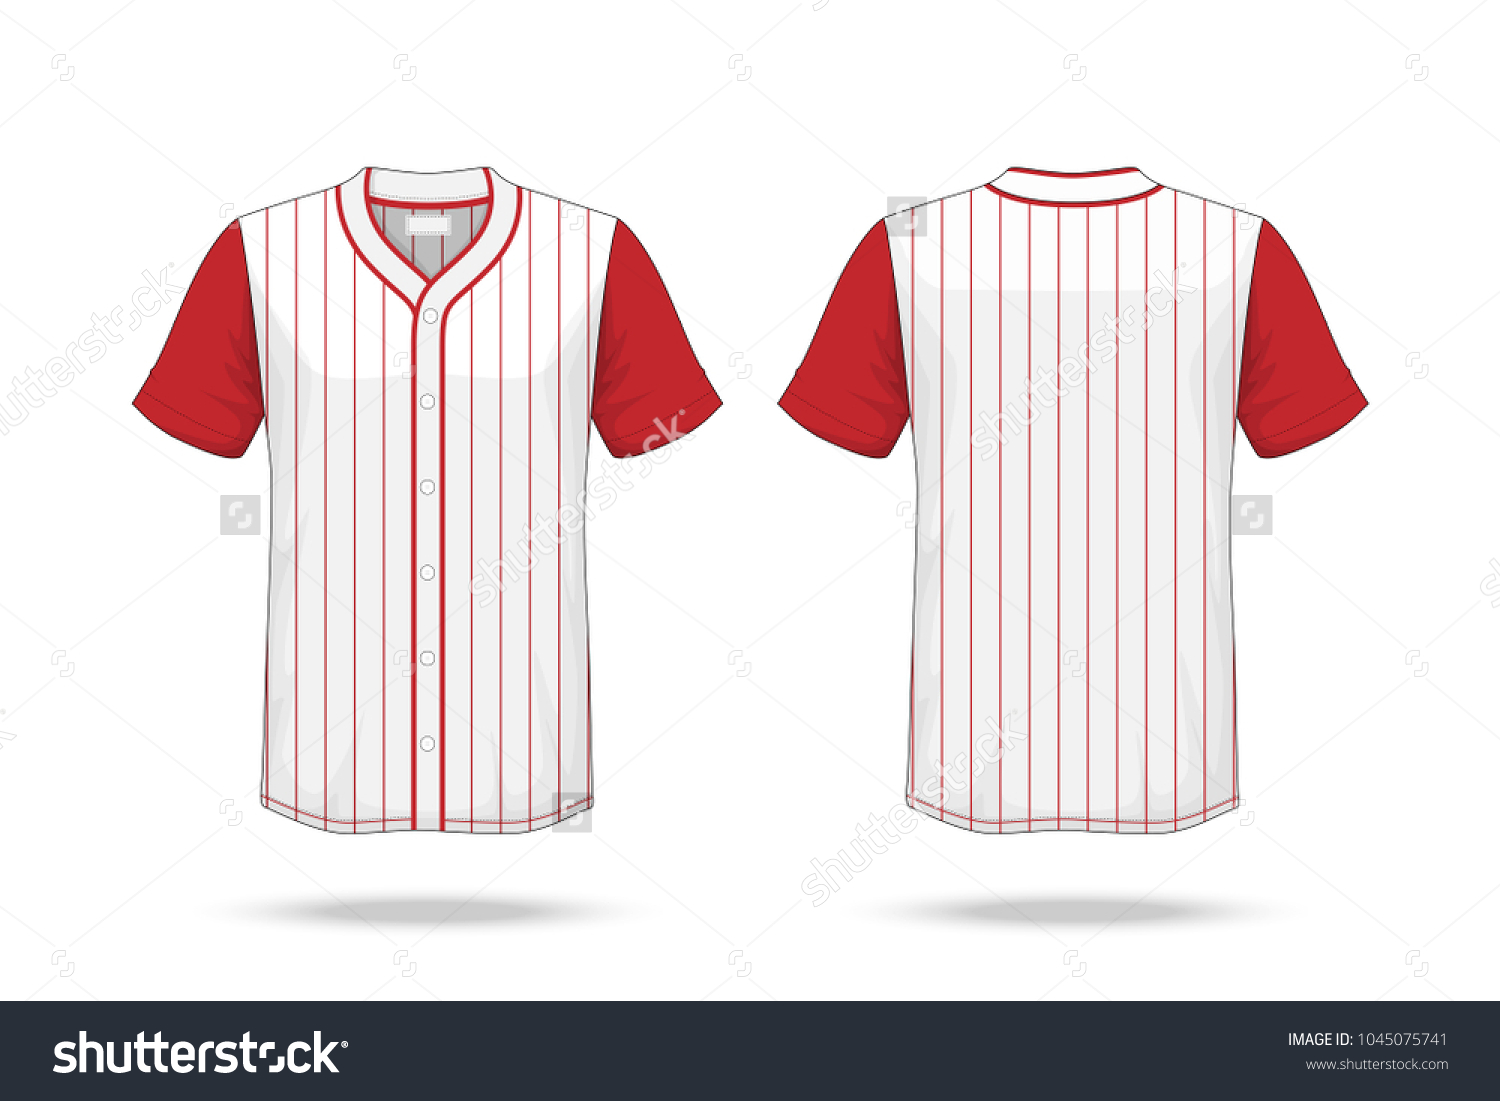 7,050 Baseball jersey graphic Images, Stock Photos & Vectors | Shutterstock